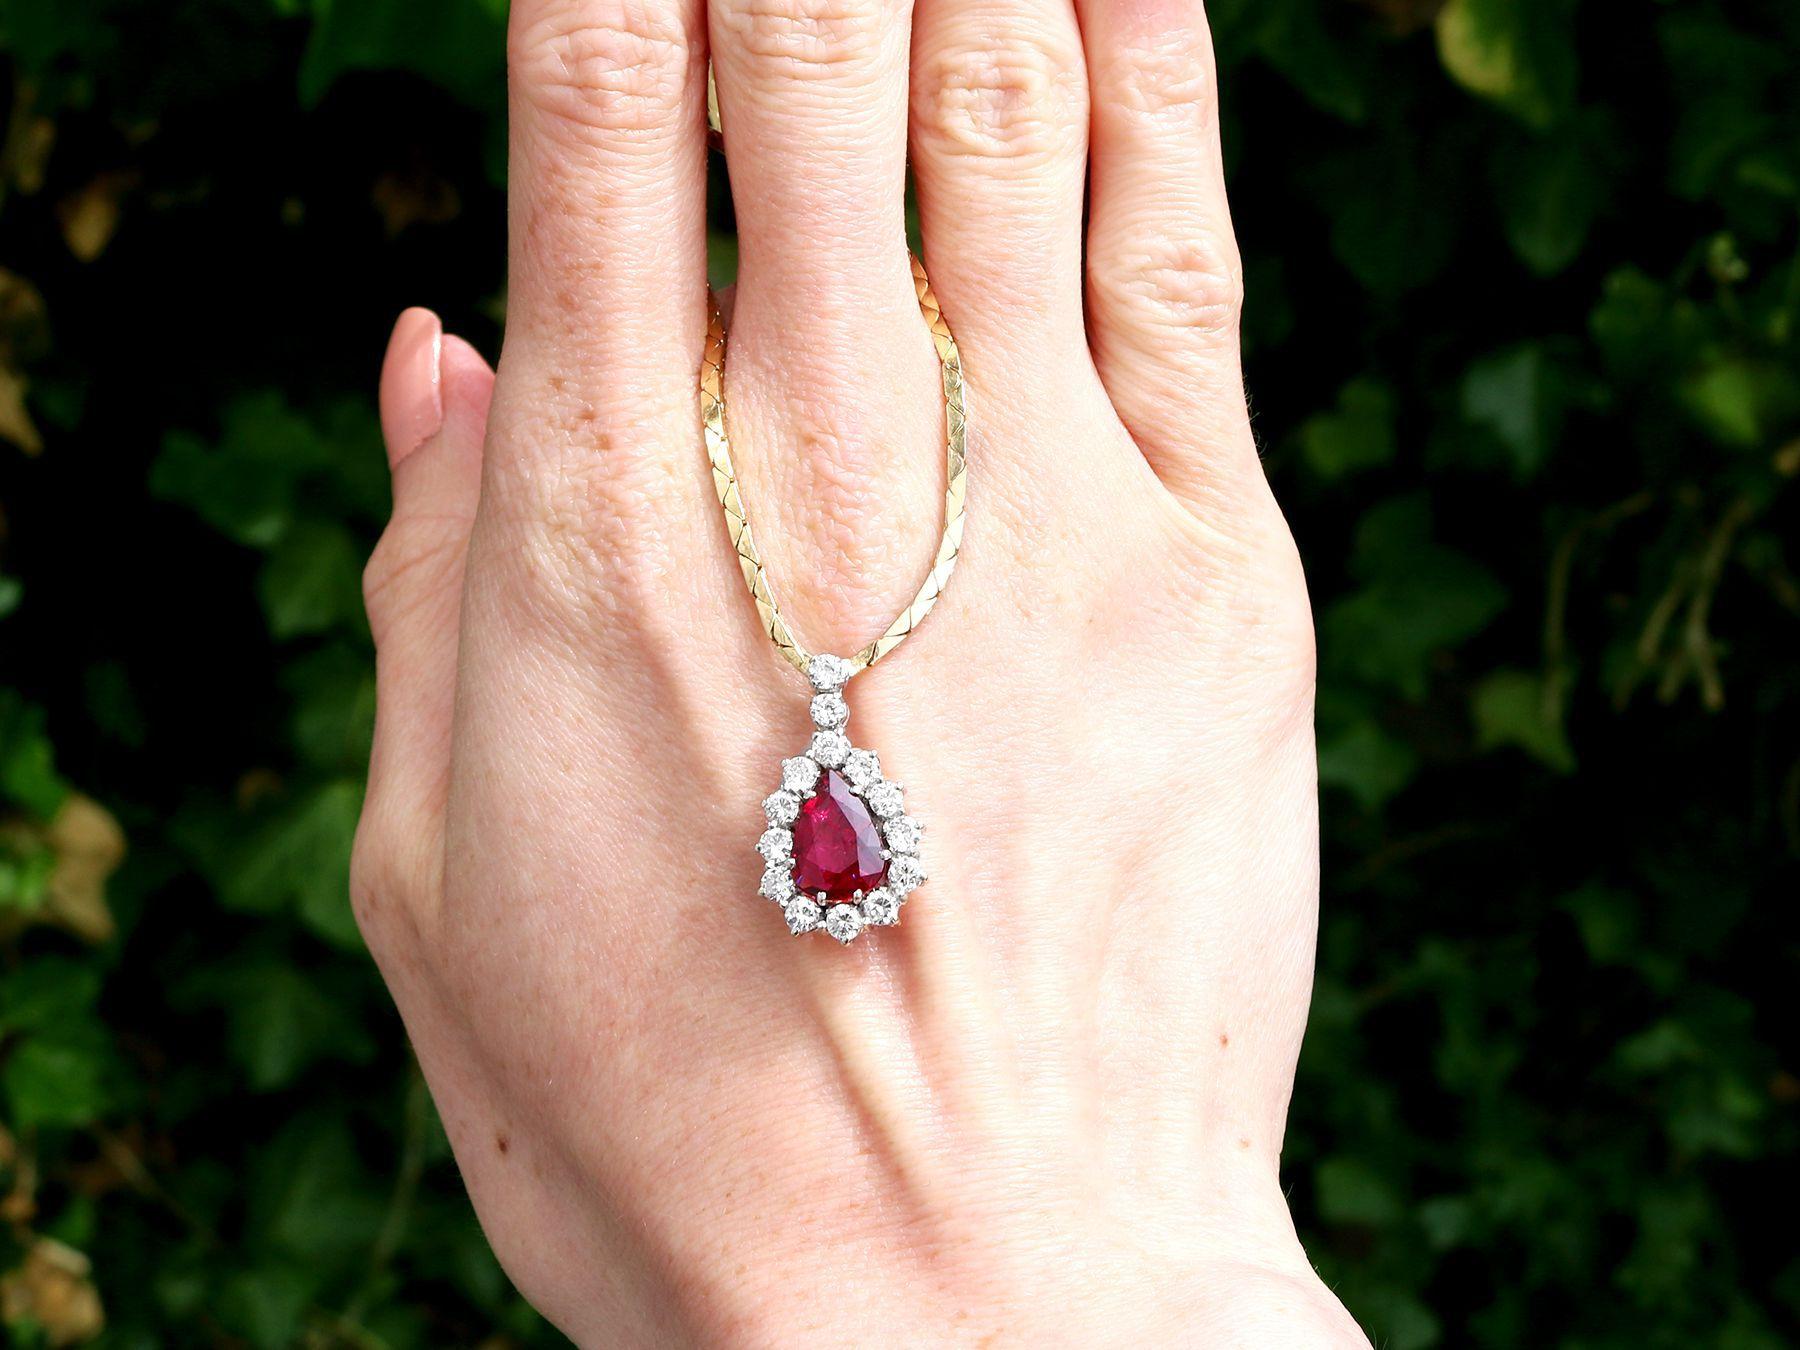 A stunning, fine and impressive 1.86 carat ruby and 1.40 carat diamond, 18 carat white gold pendant; part of our diverse gemstone jewellery and estate jewelry collections.

This stunning, fine and impressive vintage pendant has been crafted in 18ct